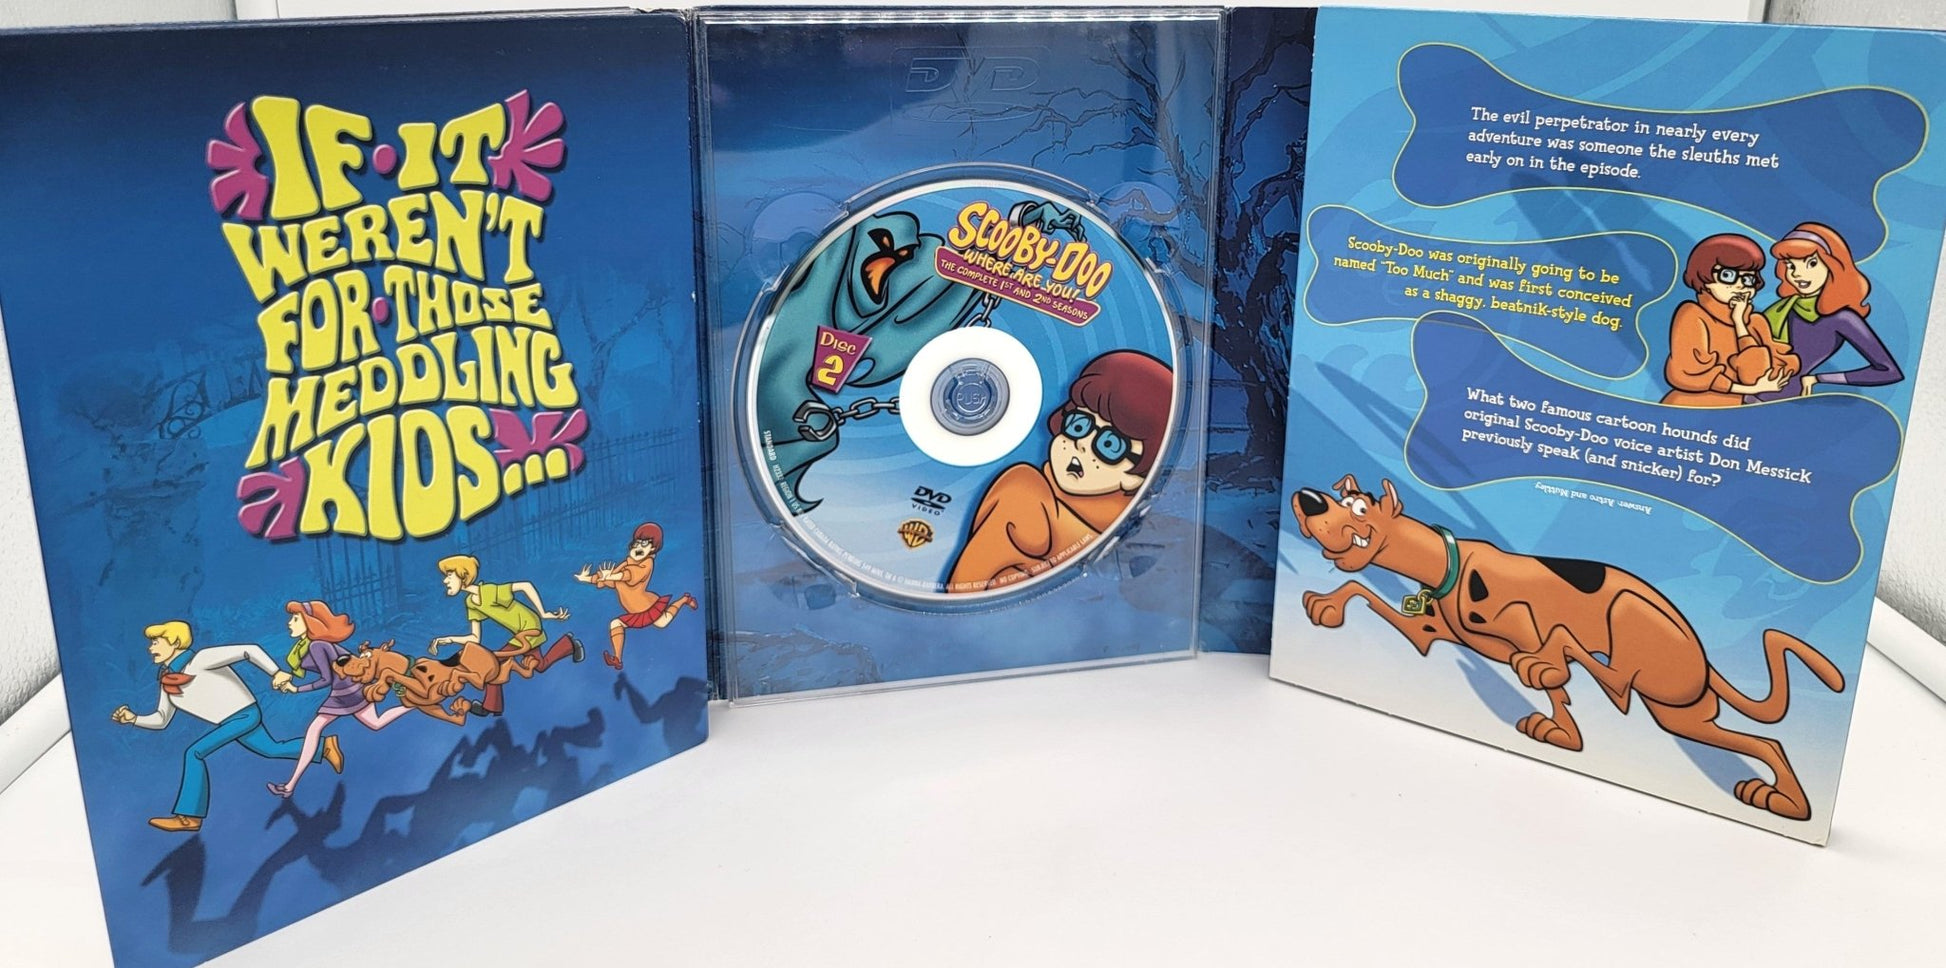 Warner Brothers - Scooby-Doo Where are you | DVD | The Complete 1st 2nd Seasons | Hanna Barbera Golden Collection - DVD - Steady Bunny Shop